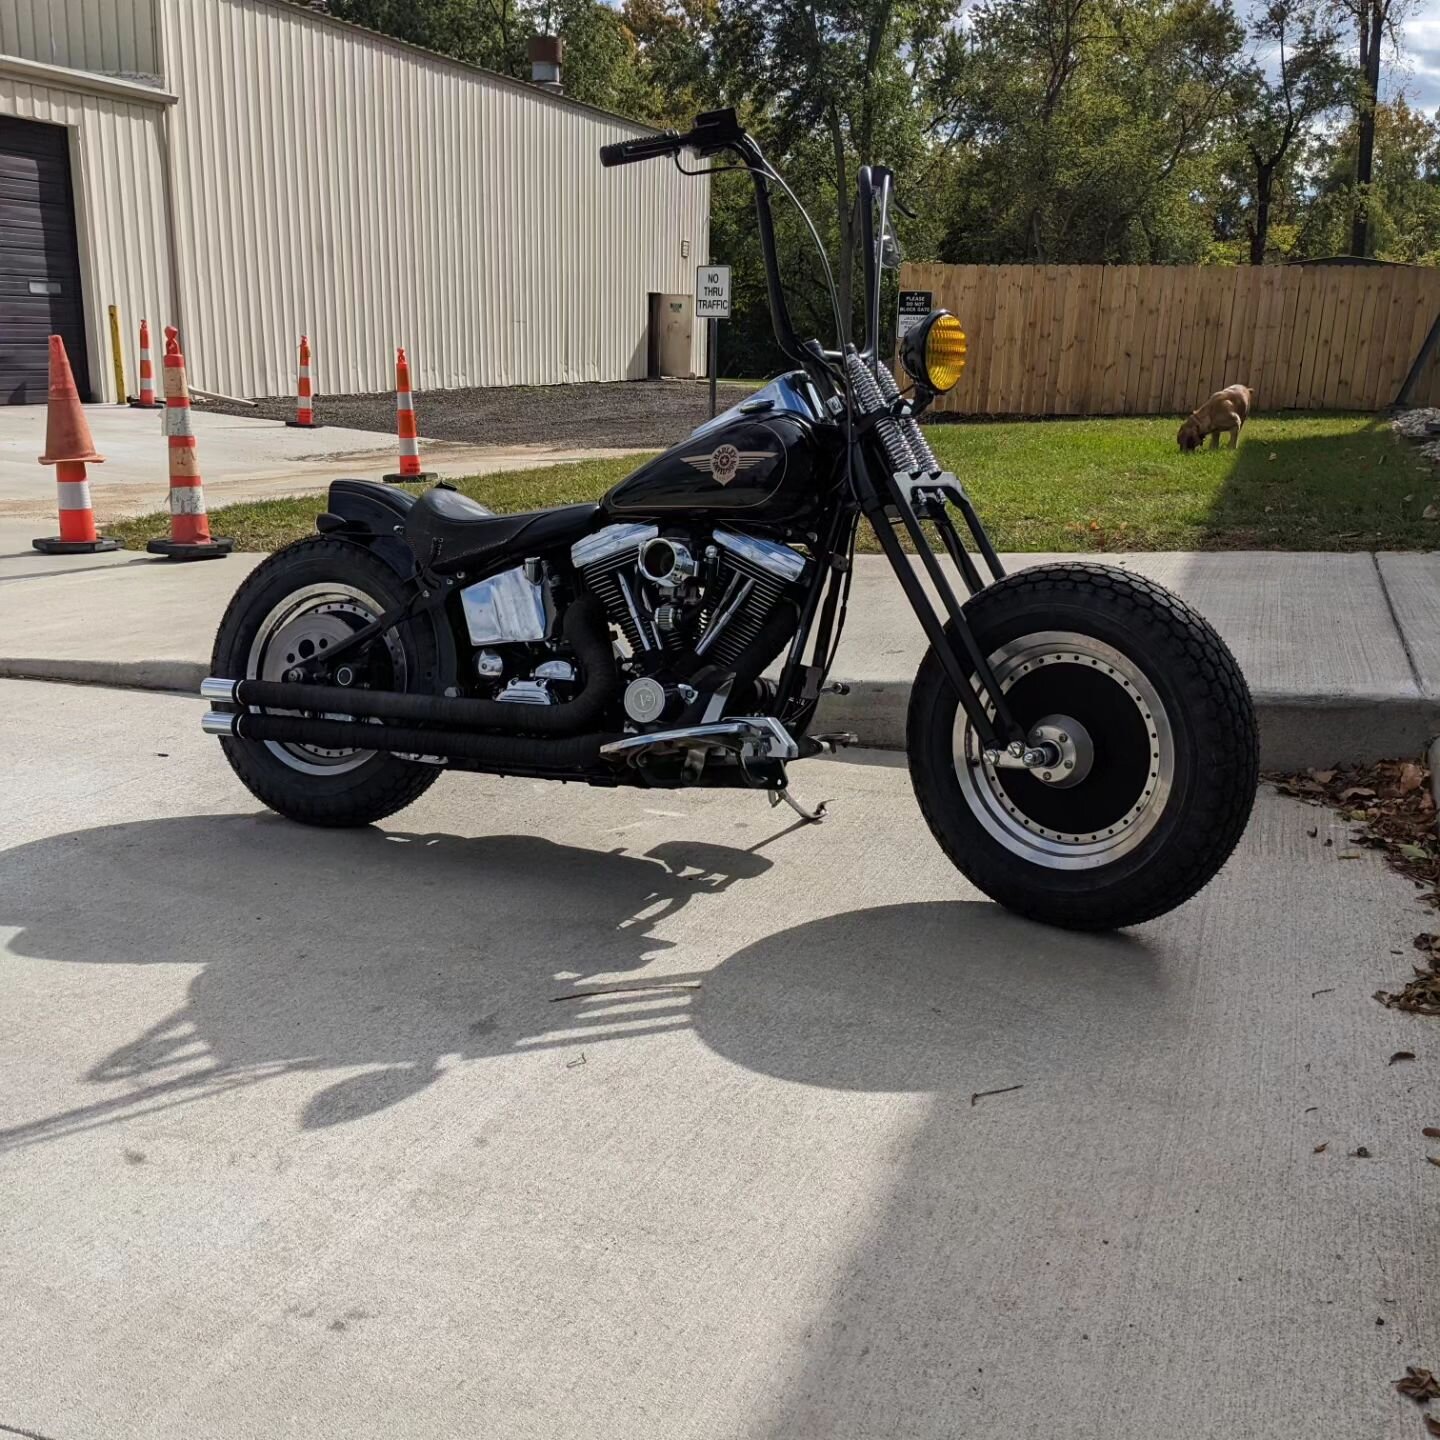 Continued, old school build on the Fatboy, finished the black out on the road king